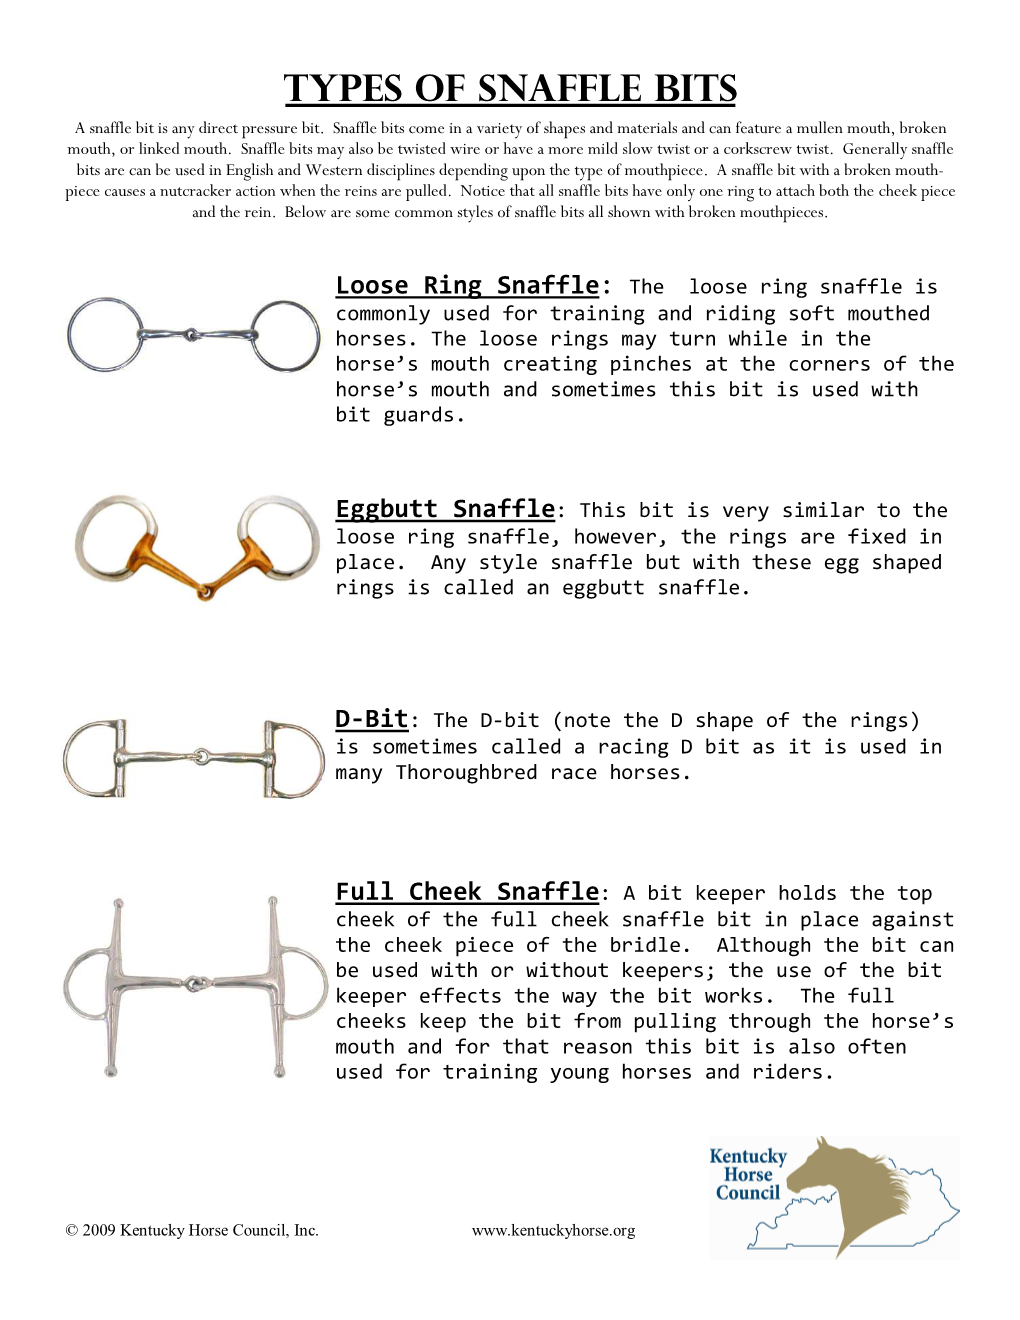 Types of Snaffle Bits